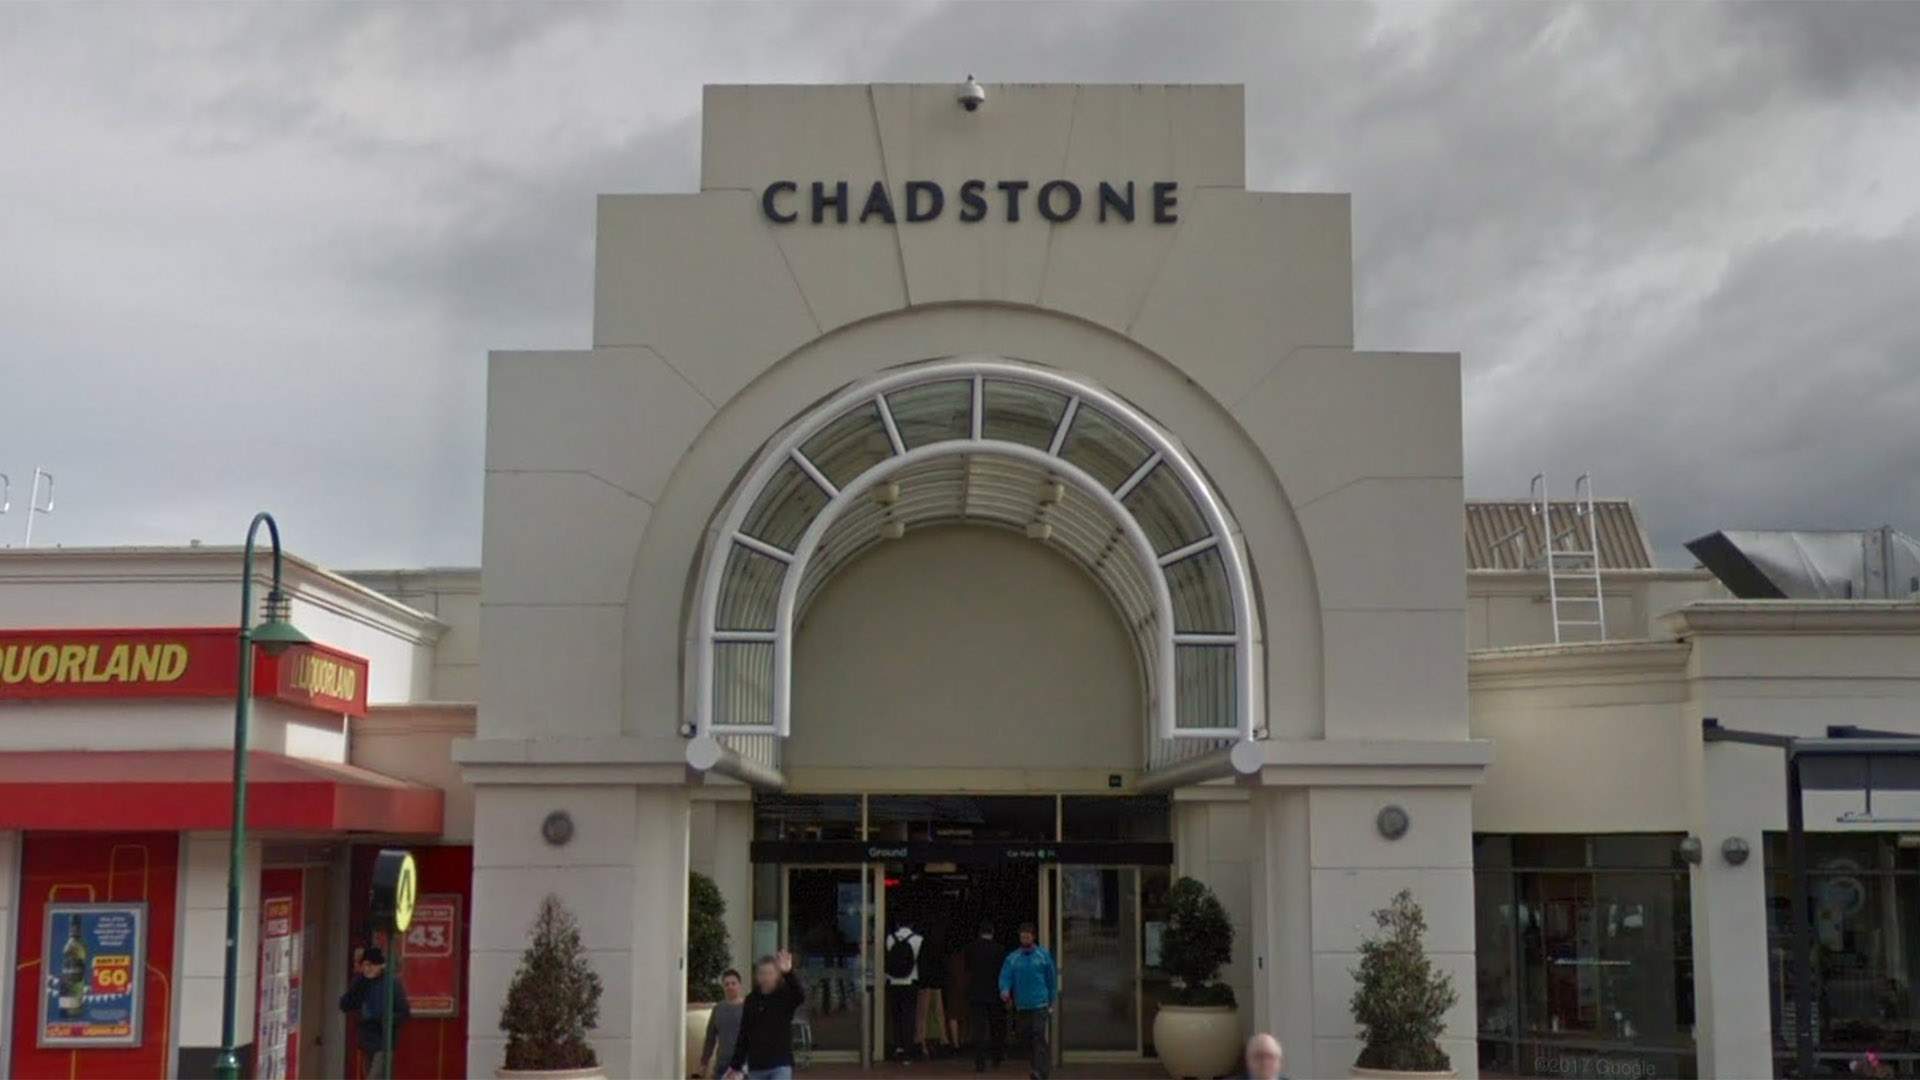 Chadstone Is the Latest Location to Join Victoria's Now 271-Venue List of Exposure Sites